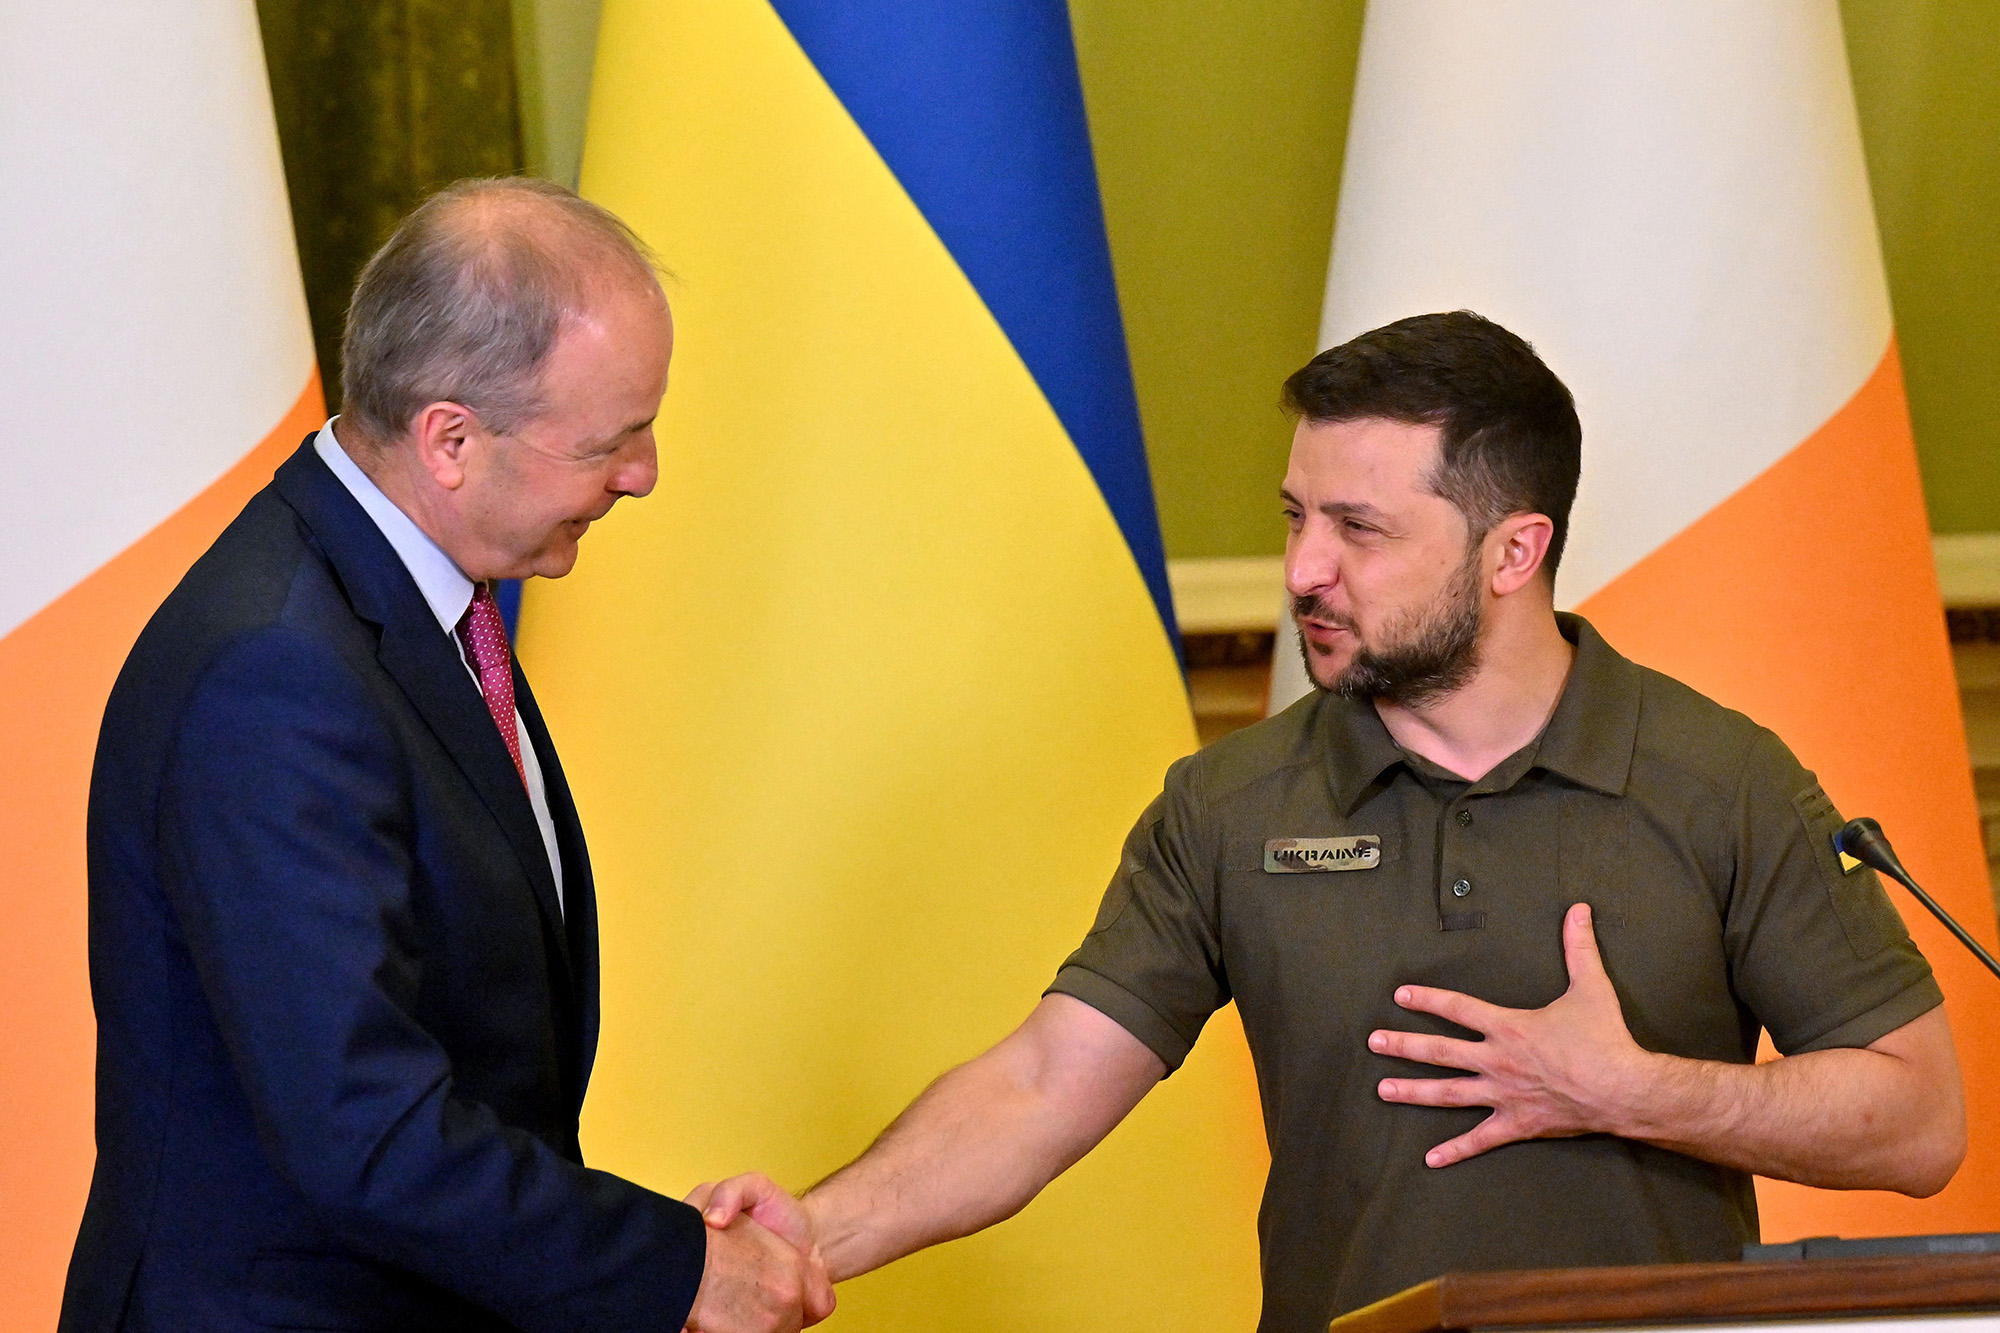 Ukraine’s President Volodymyr Zelensky shakes hands with Irish Prime Minister Micheál Martin during their press conference in Kyiv on July 6.